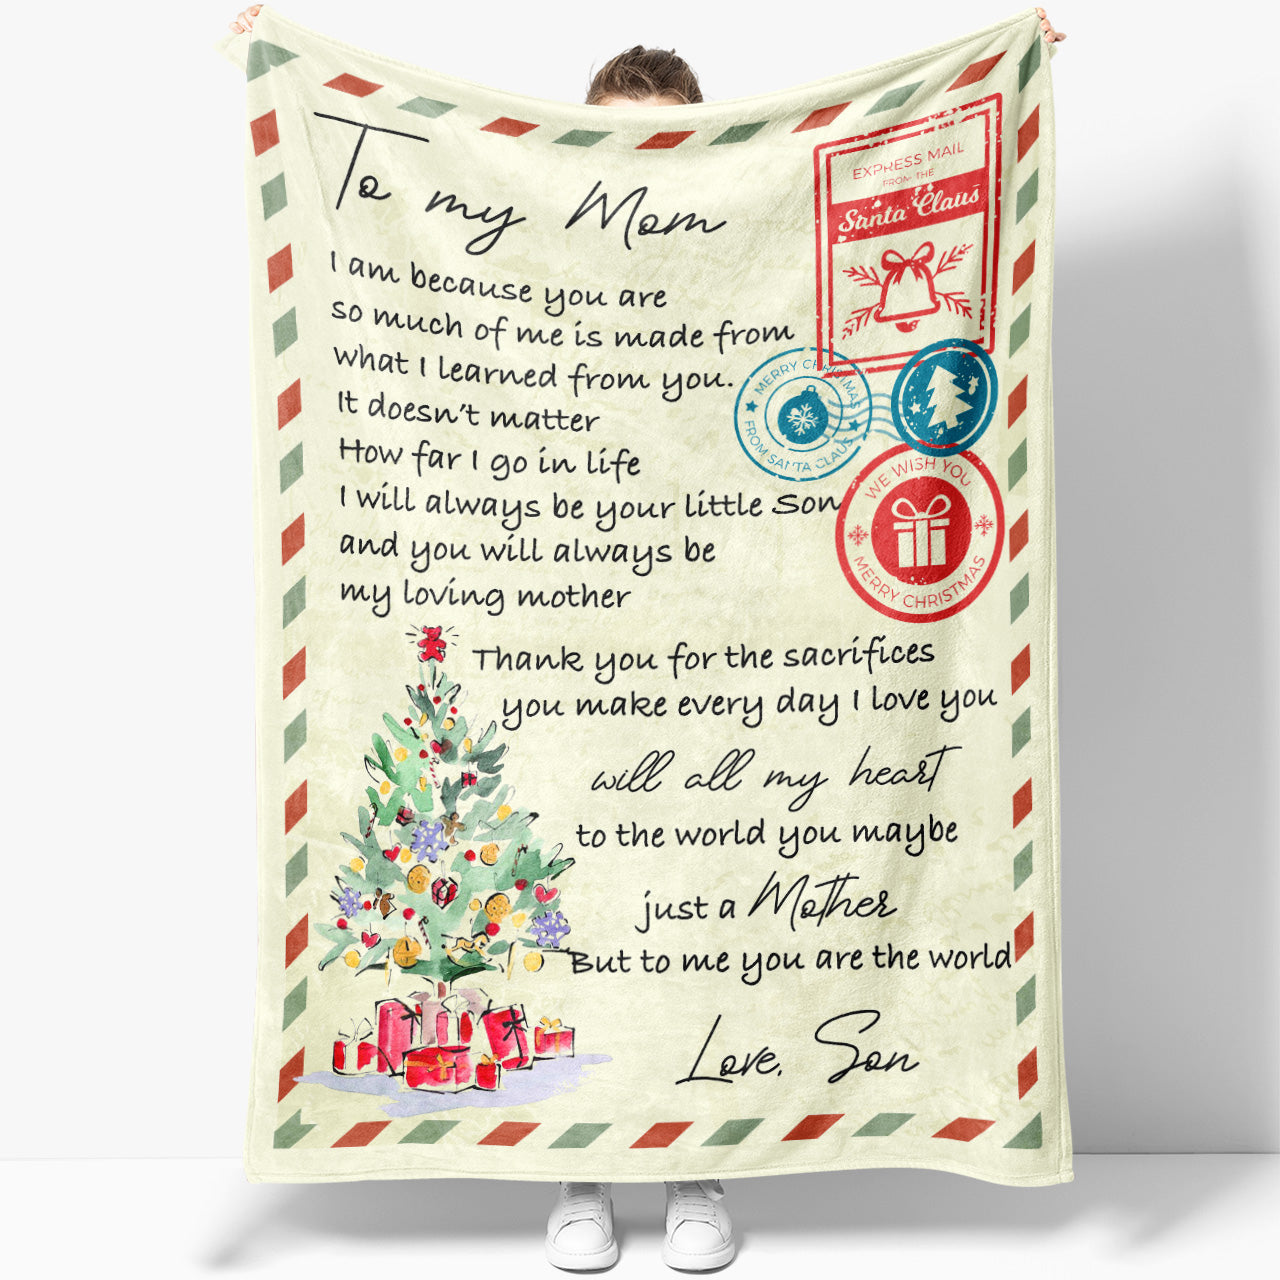 Blanket Gift ideas For Mom, Christmas Gifts For Mom, You Are, Gift